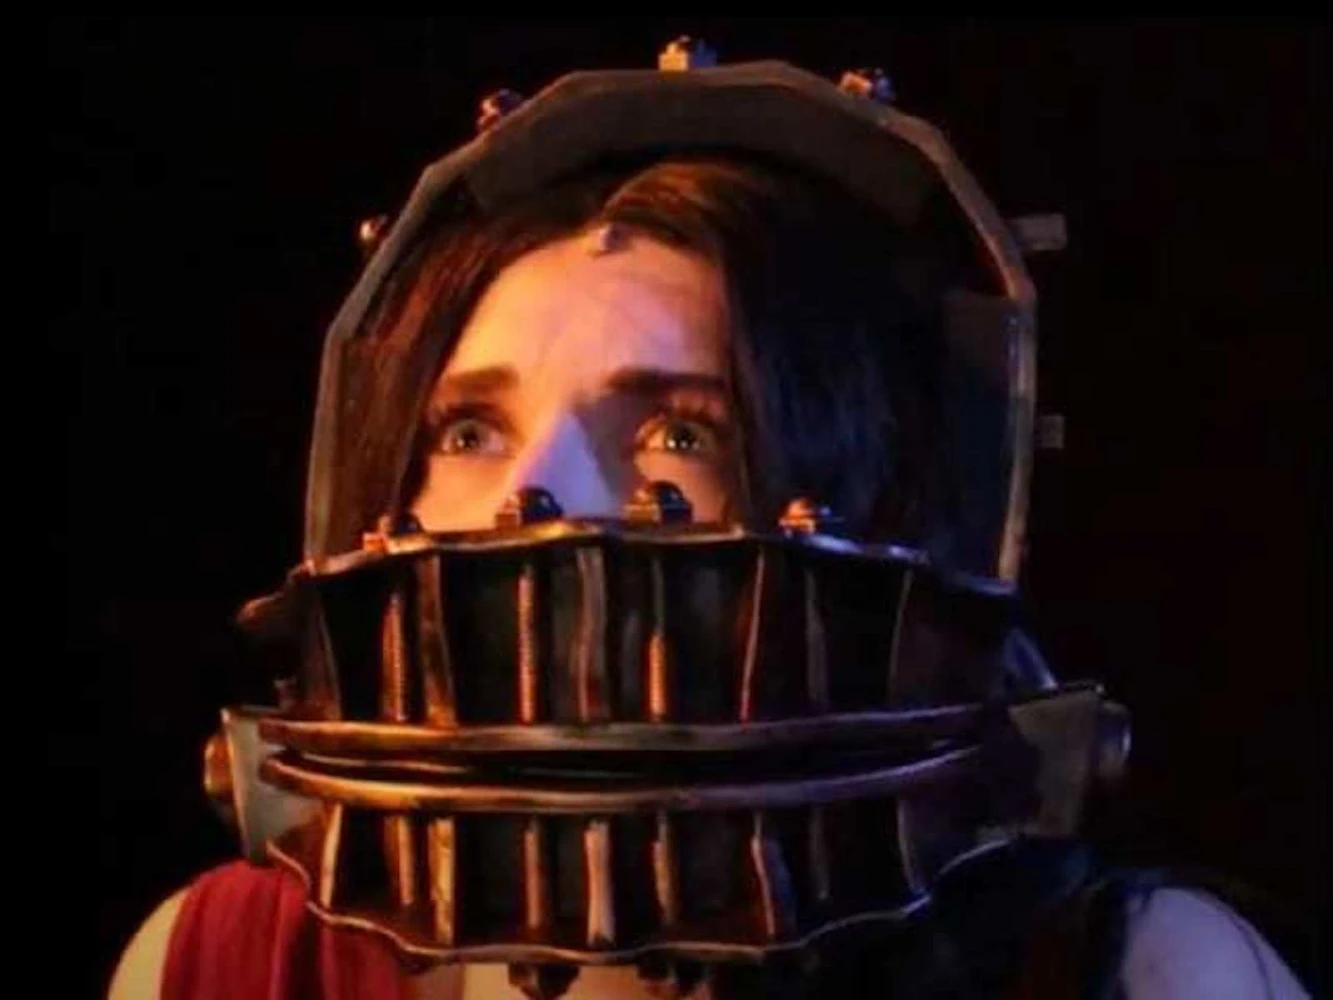 SAW The Musical The Unauthorized Parody of Saw: What to expect - 2